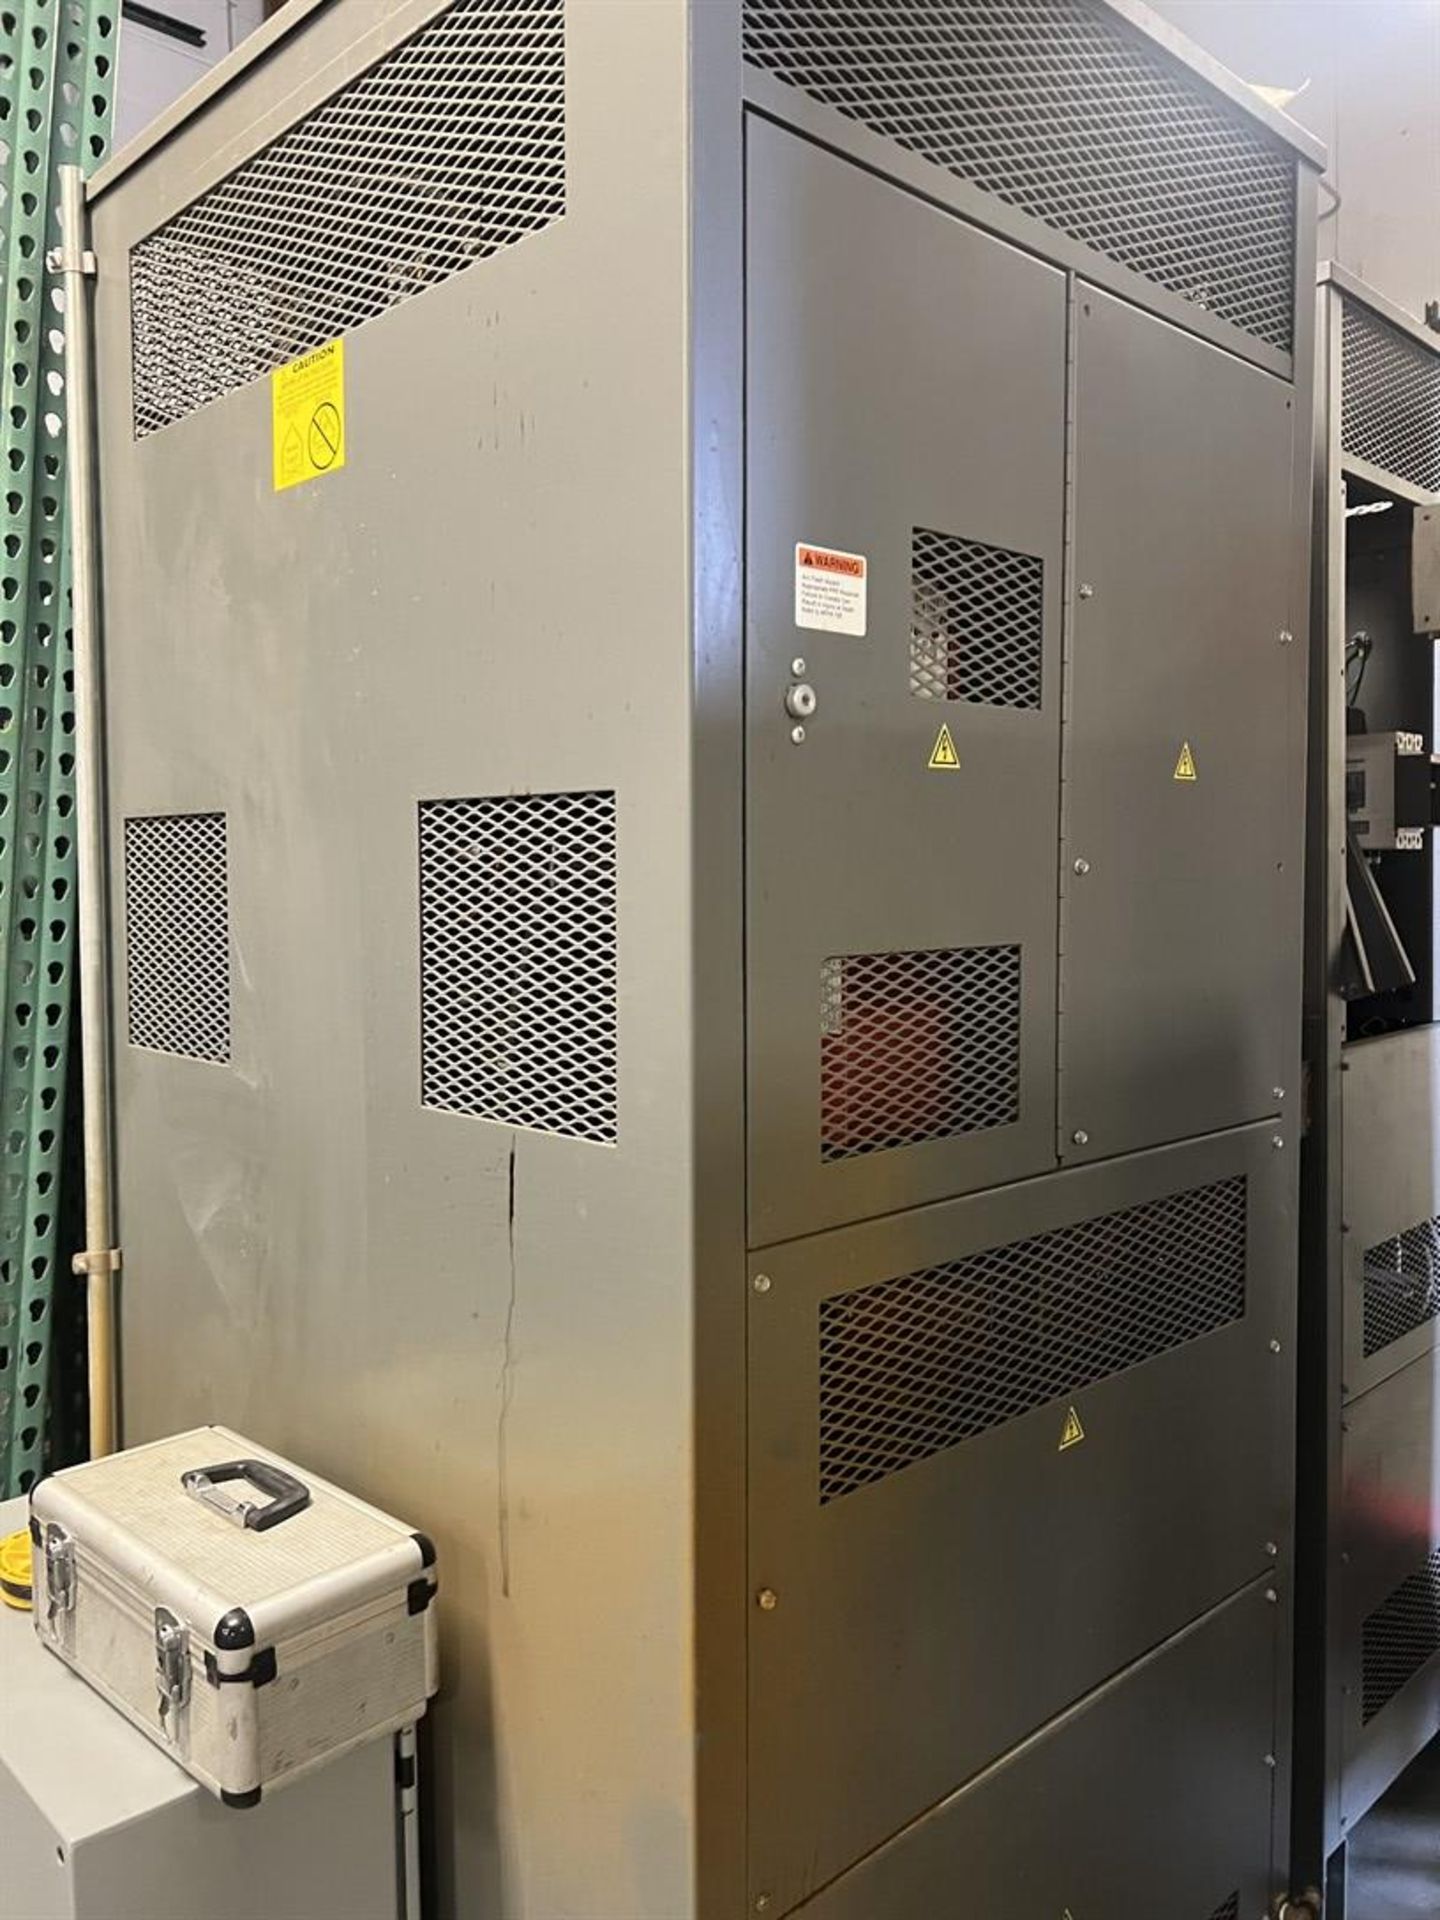 83 KG KYROPOULOS Growth Furnace w/ WARNER 135 KW SCR Controlled DC Power Supply, 16-Day Process - Image 5 of 5